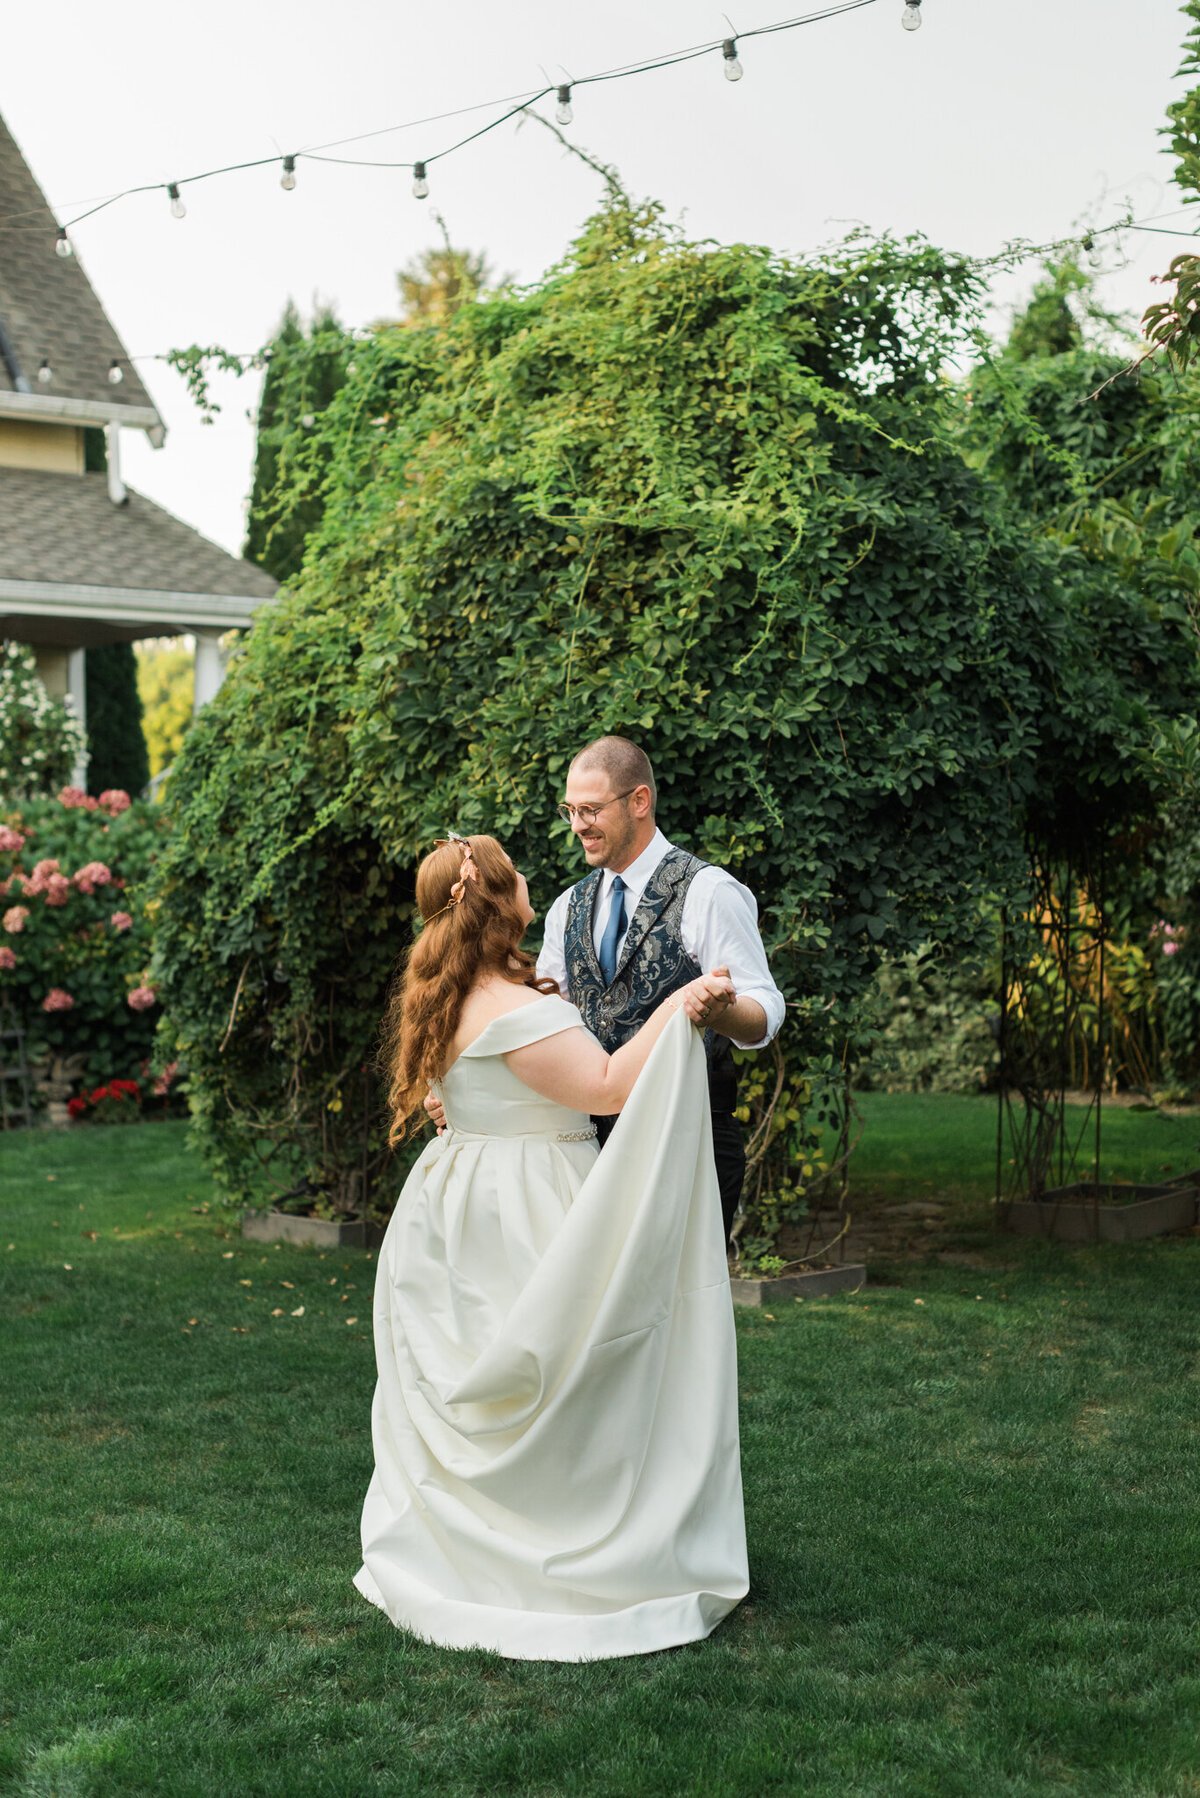 Mount-Vernon-Wedding-Grand-Willow_Caylie-Mash-Photography_476